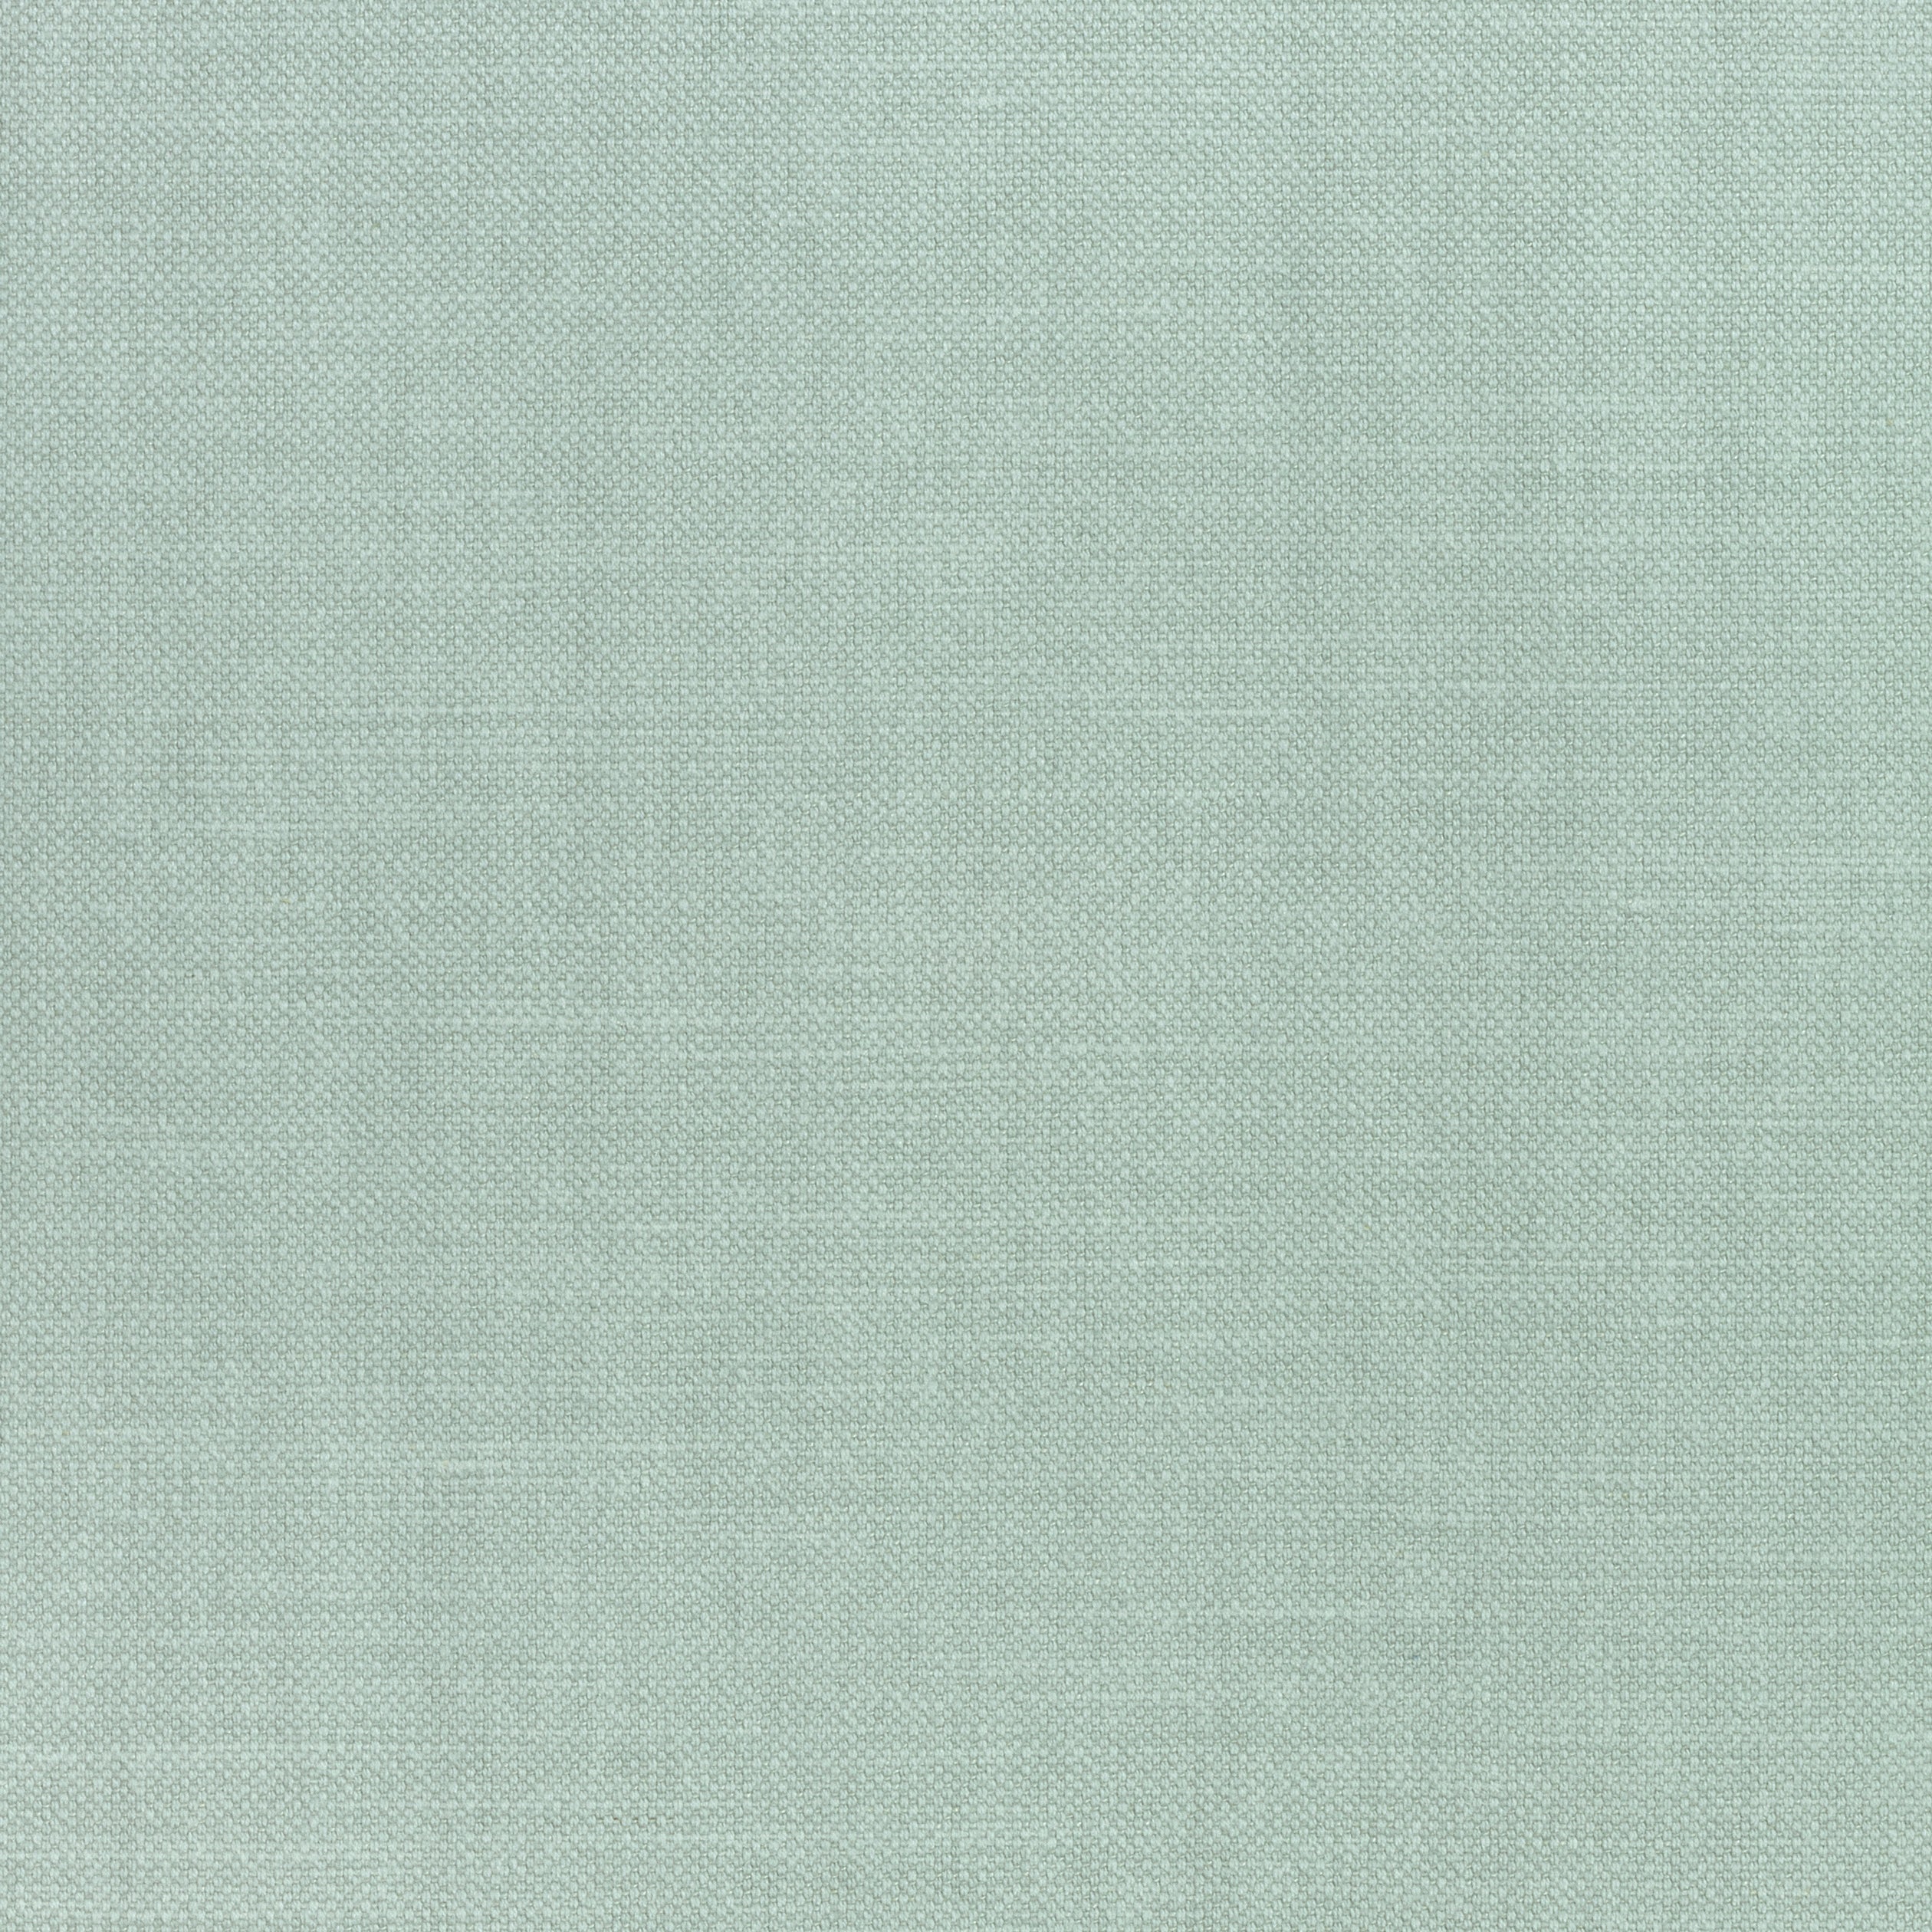 Prisma fabric in seafoam color - pattern number W70148 - by Thibaut in the Woven Resource Vol 12 Prisma Fabrics collection